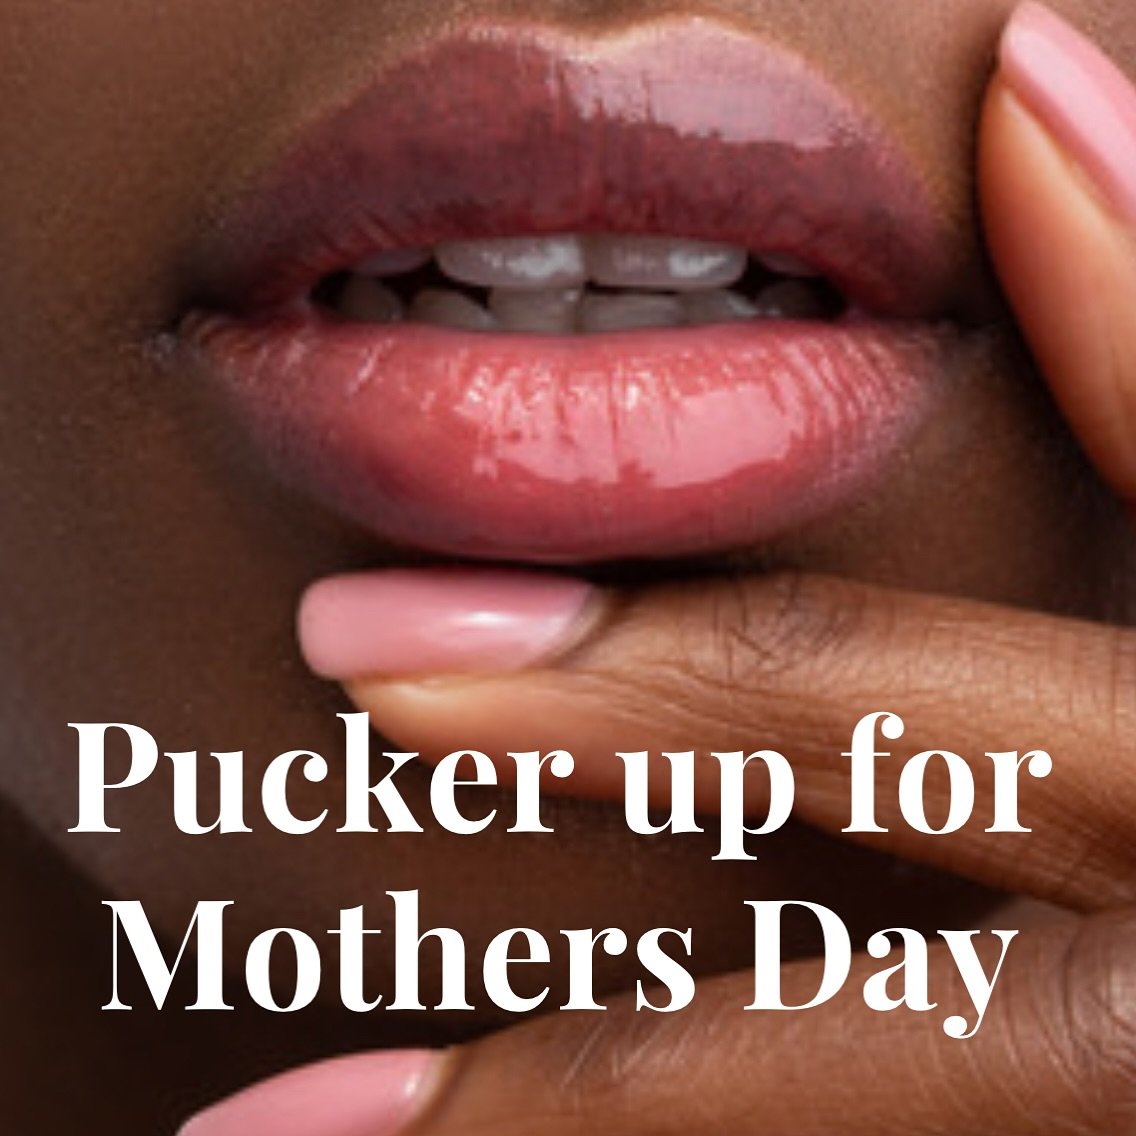 On the Flyer: 🌸✨💋 Mother&rsquo;s Day Special 💋✨🌸

Treat the queen in your life to a gift as beautiful as she is! 👑💕 This Mother&rsquo;s Day, give the gift of confidence with our luxurious Lip Blush treatment. 💄💋

Then when we post the descrip